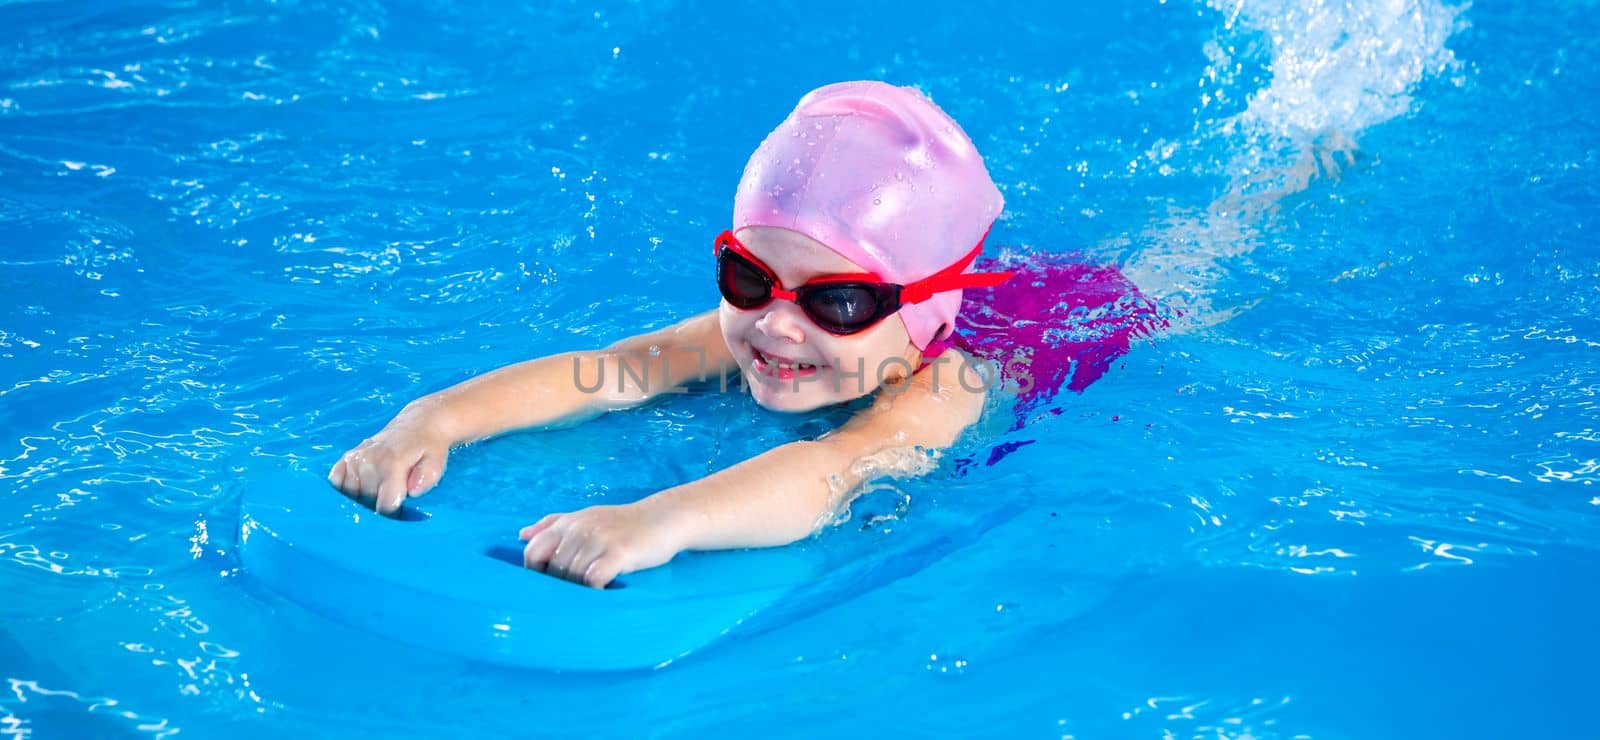 Smiling little girl learning to swim in indoor pool with flutter board during swimming class